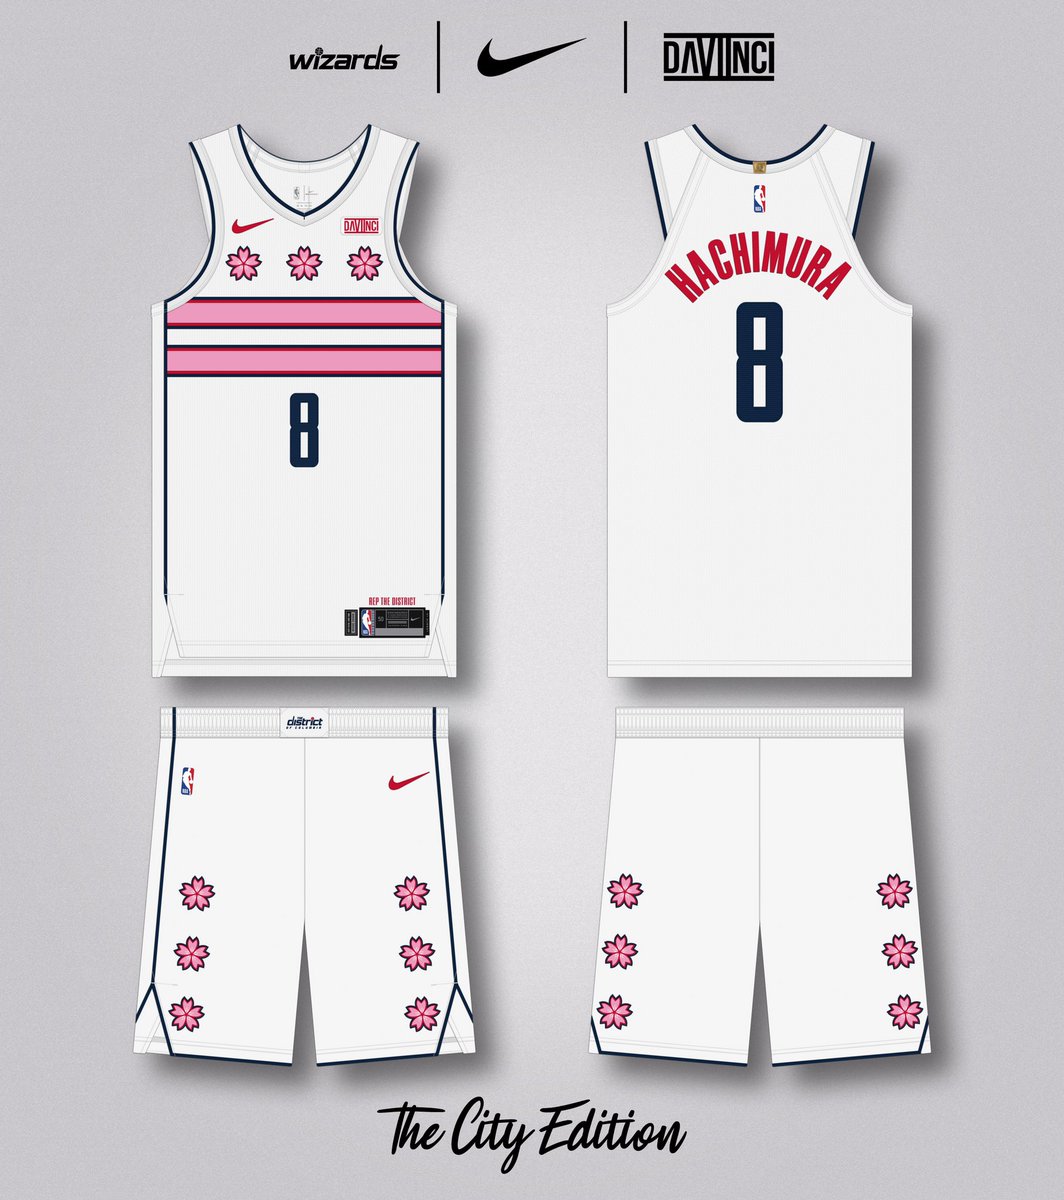 This is step 1 of my Cherry Blossom jersey design, thoughts? : r